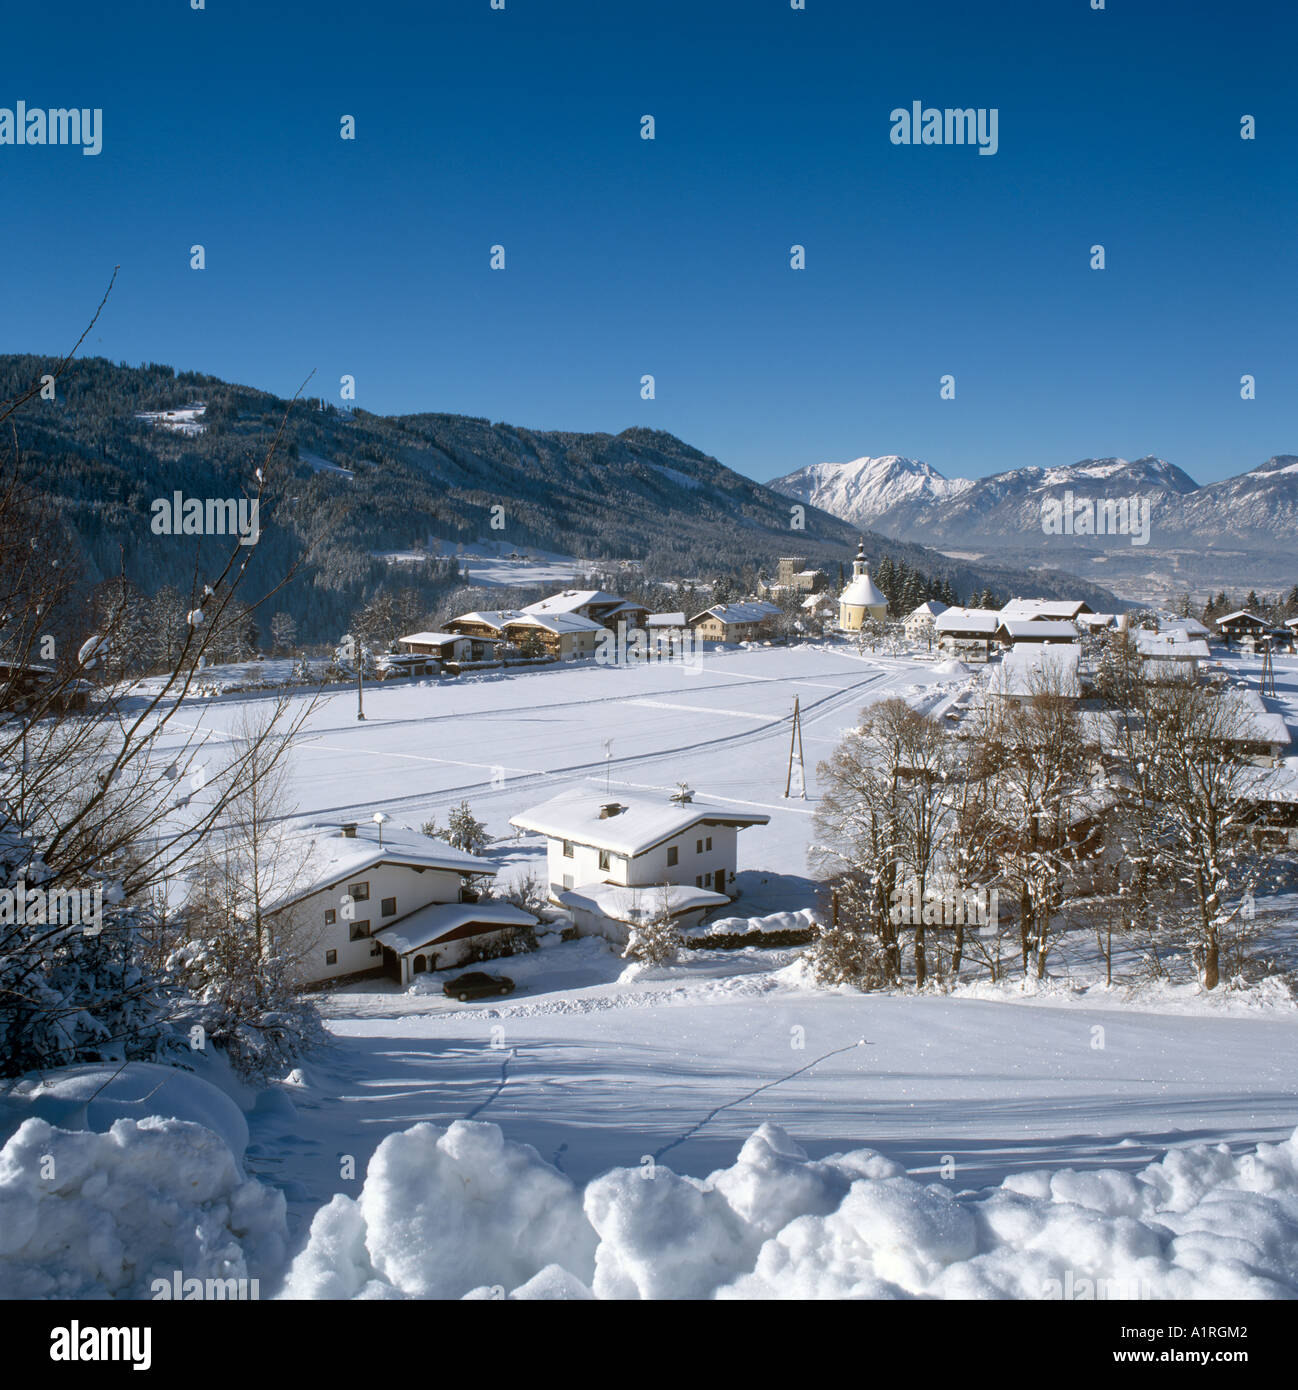 View over the resort of Itter, near Soll (Soell), Tyrol, Austria Stock Photo